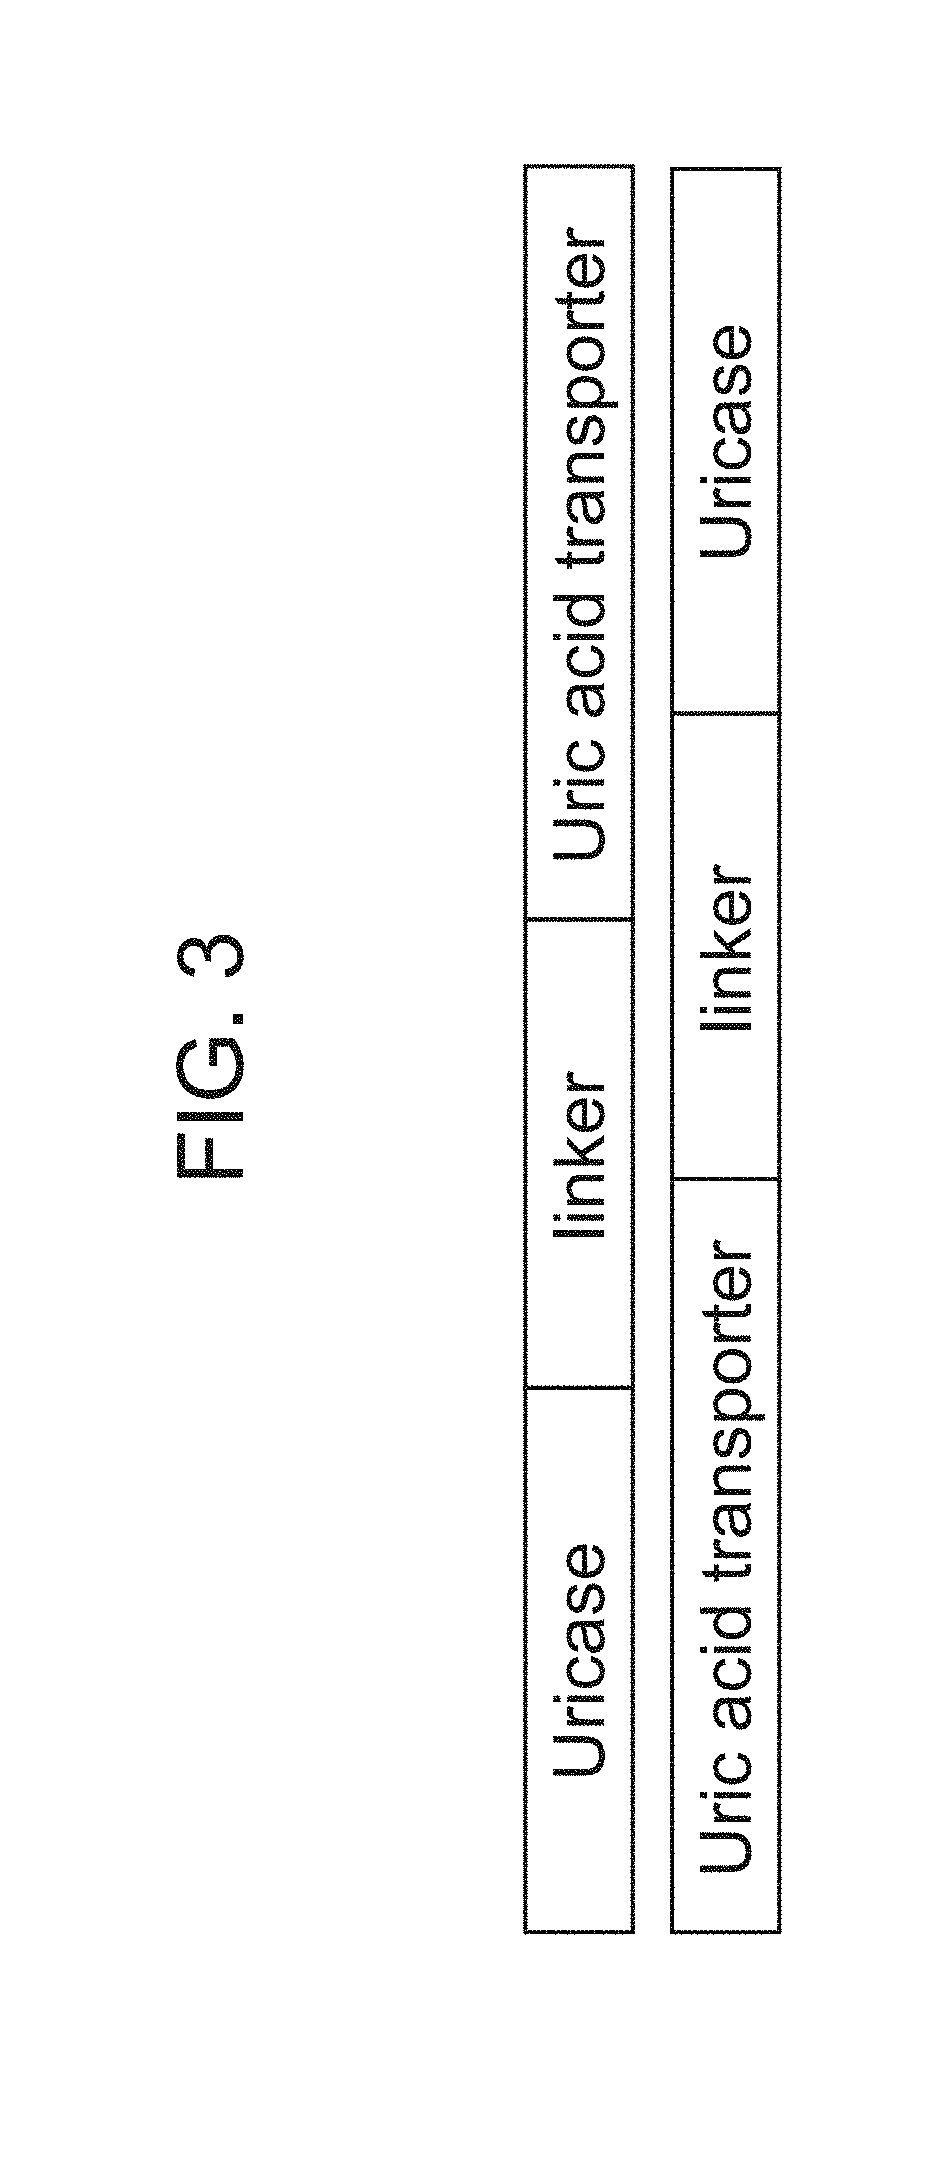 Therapeutic cell systems and methods for treating hyperuricemia and gout